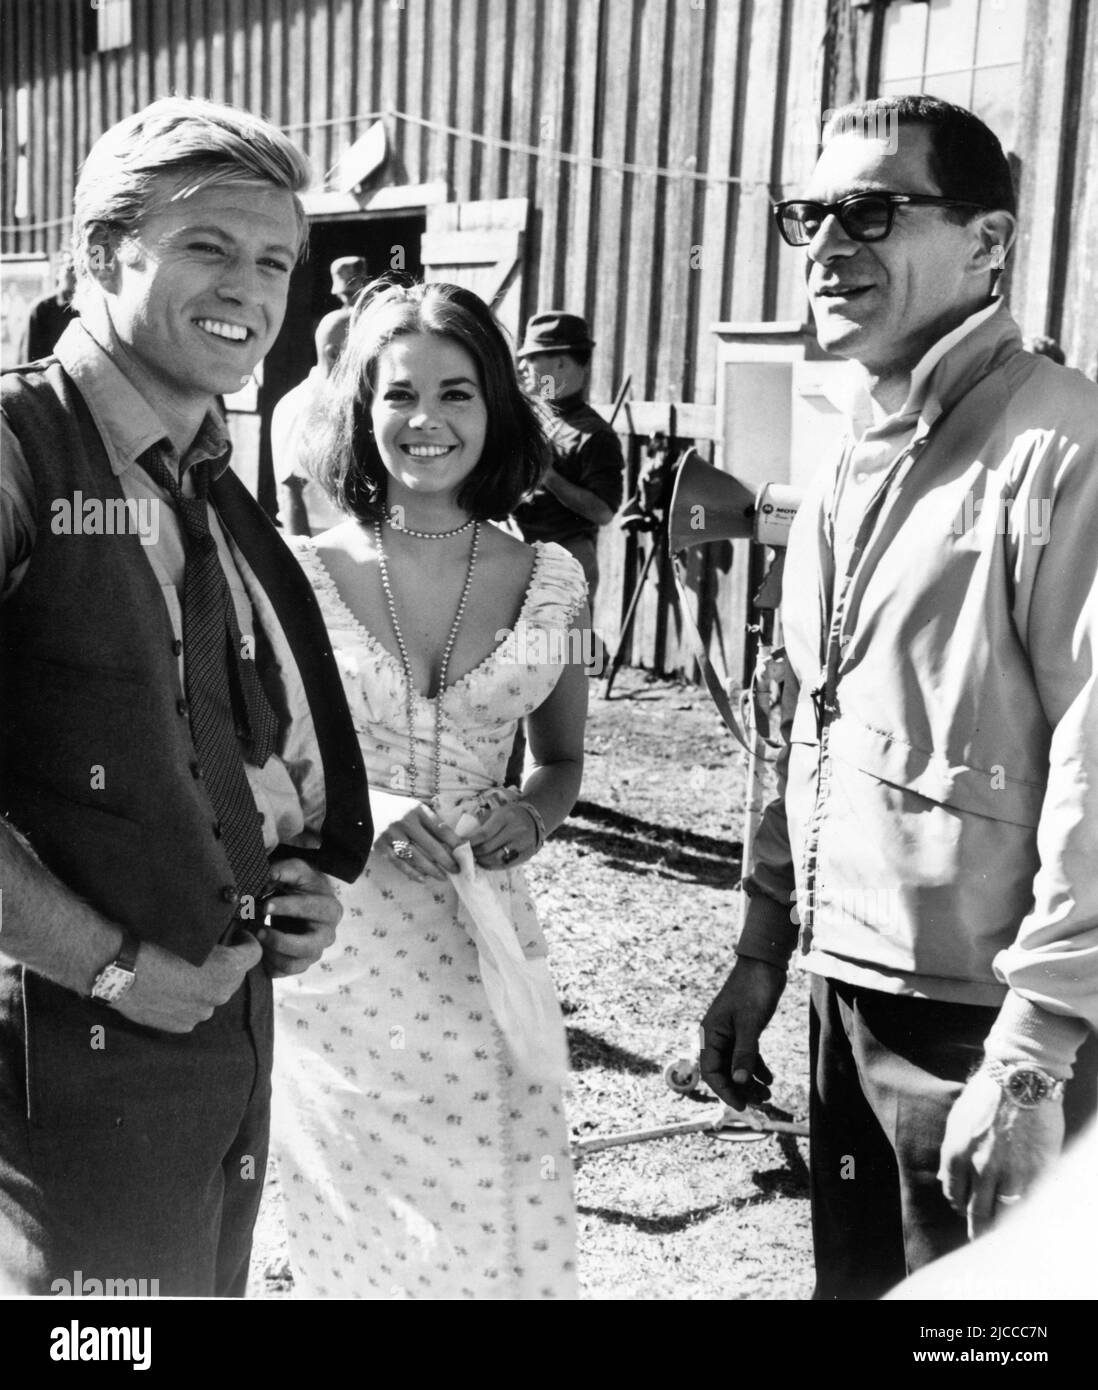 ROBERT REDFORD NATALIE WOOD and Director SYDNEY POLLACK on set location candid during filming of THIS PROPERTY IS CONDEMNED 1966 director SYDNEY POLLACK play Tennessee Williams screenplay Francis Ford Coppola Fred Coe and Edith Sommer costumes Edith Head Seven Arts Productions / Paramount Pictures Stock Photo